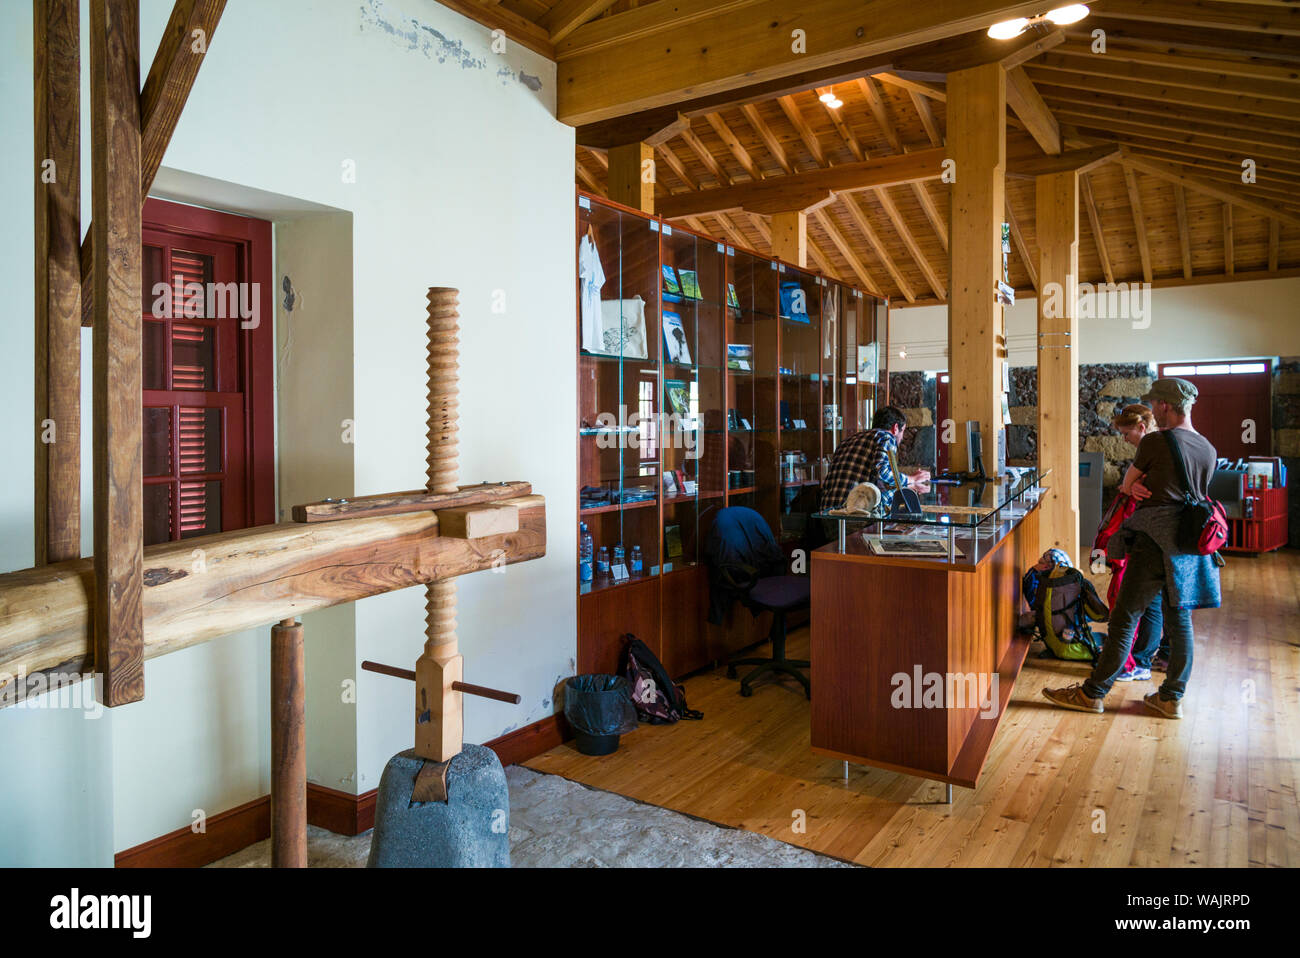 Portugal, Azores, Faial Island, Horta. Interior of the Dabney Family Home, exhibit in former home of New England Yankee traders (Editorial Use Only) Stock Photo